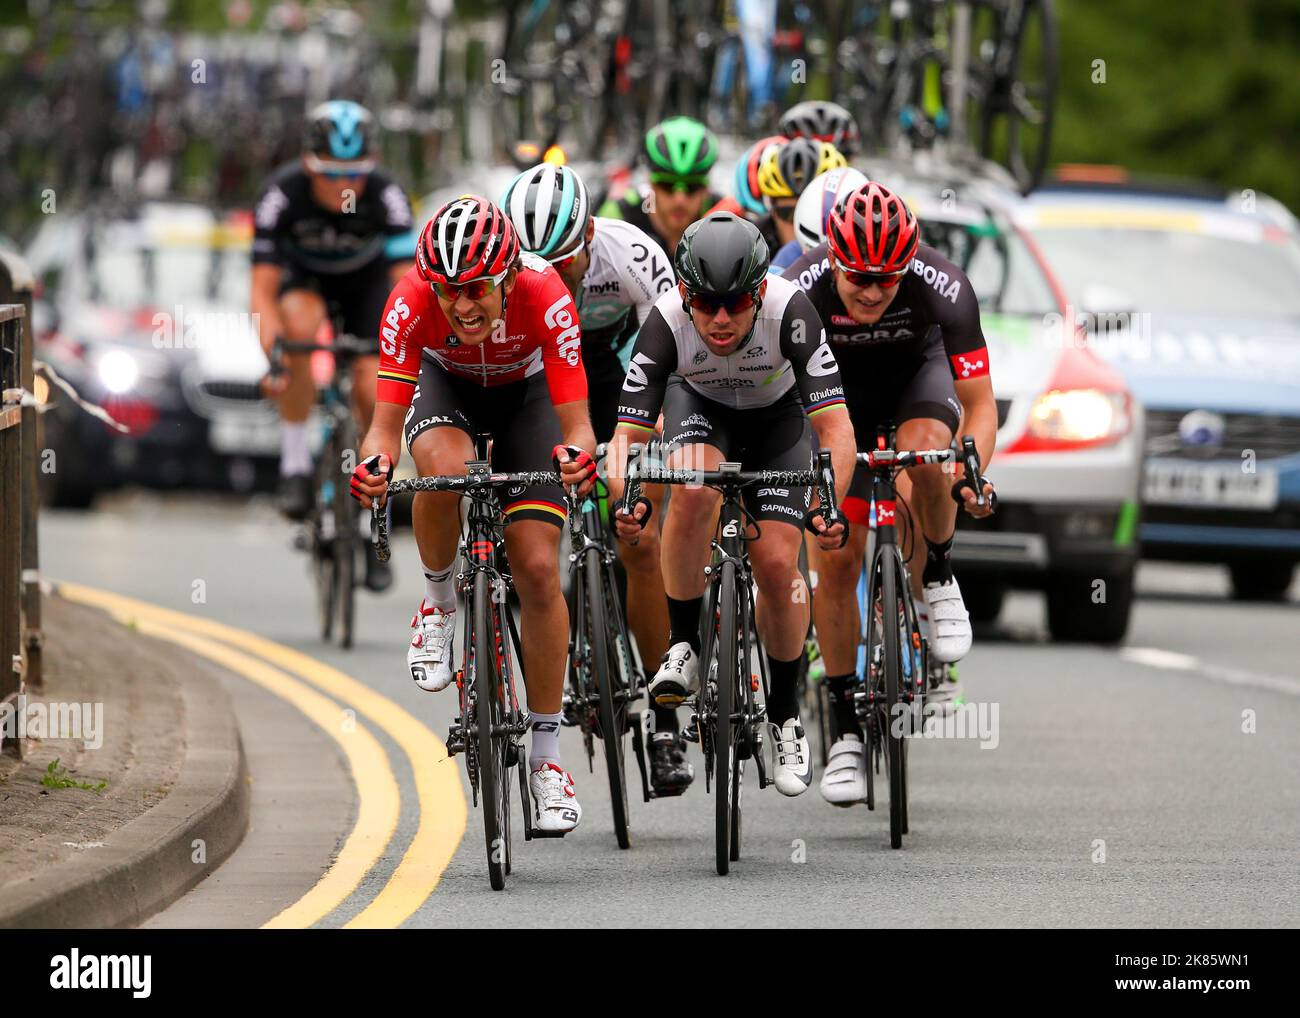 British Mens National Road Race Champs 2016 James Shaw (lotto soudal U23) and Mark Cavendish (Team Dimension Data) drive the chase group in the closing stages of the British National Road Race 2016 Stock Photo